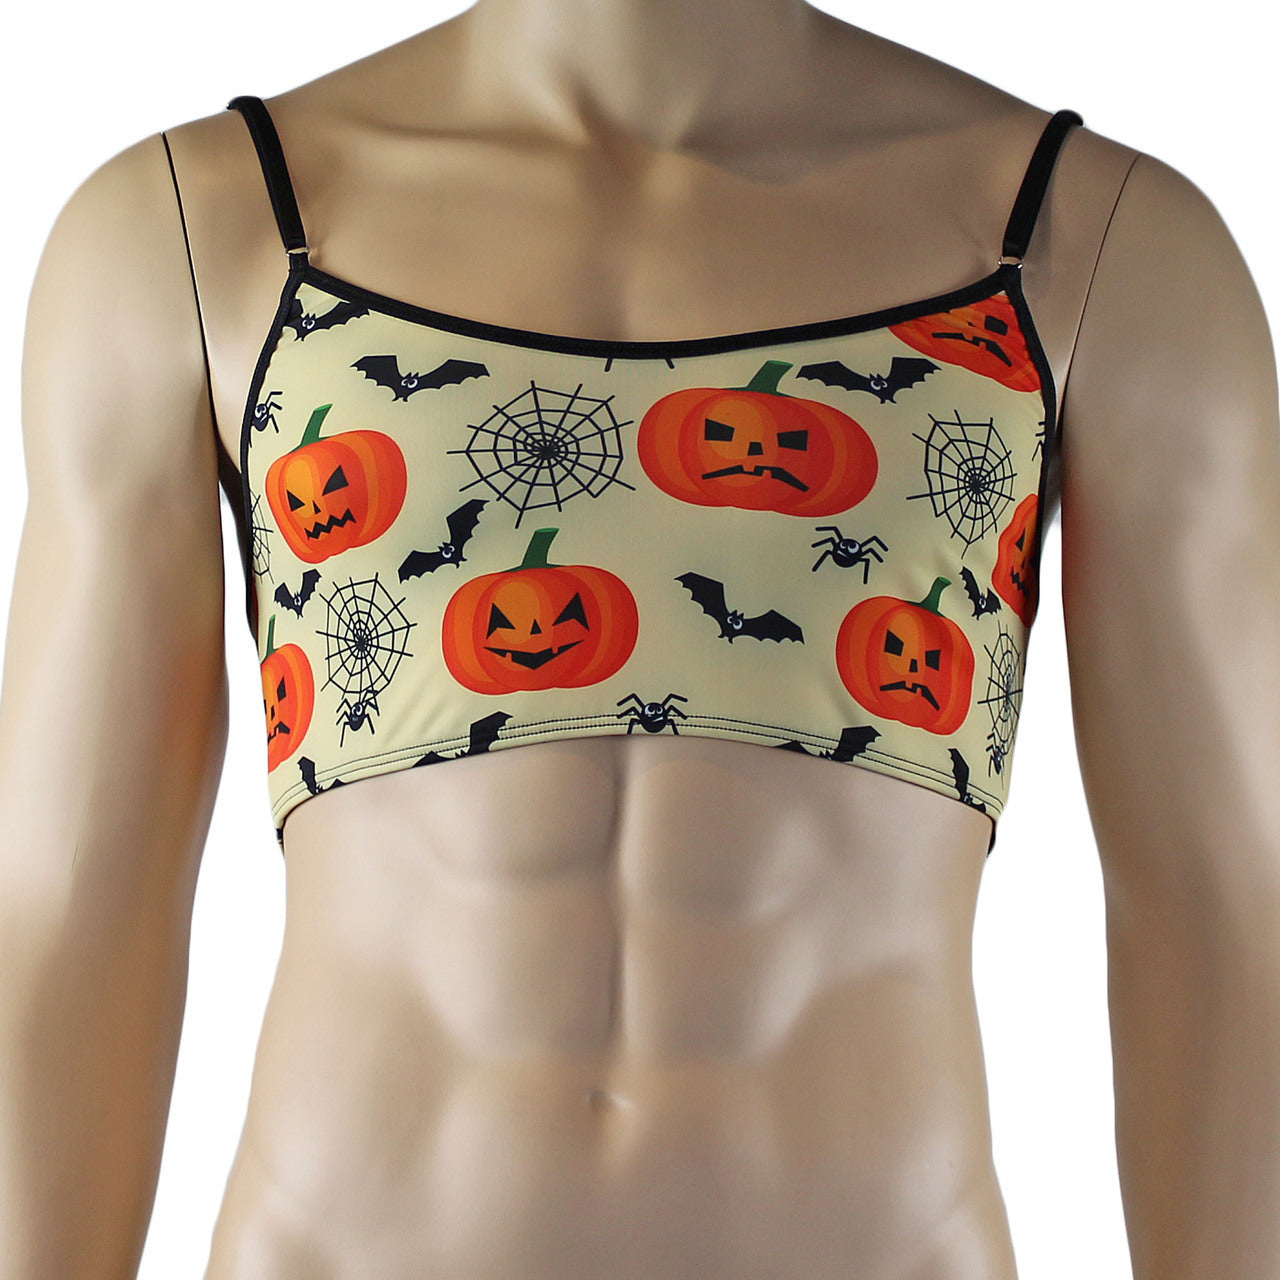 Mens Halloween Pumpkin Faces, Spiders and Bats Camisole Top